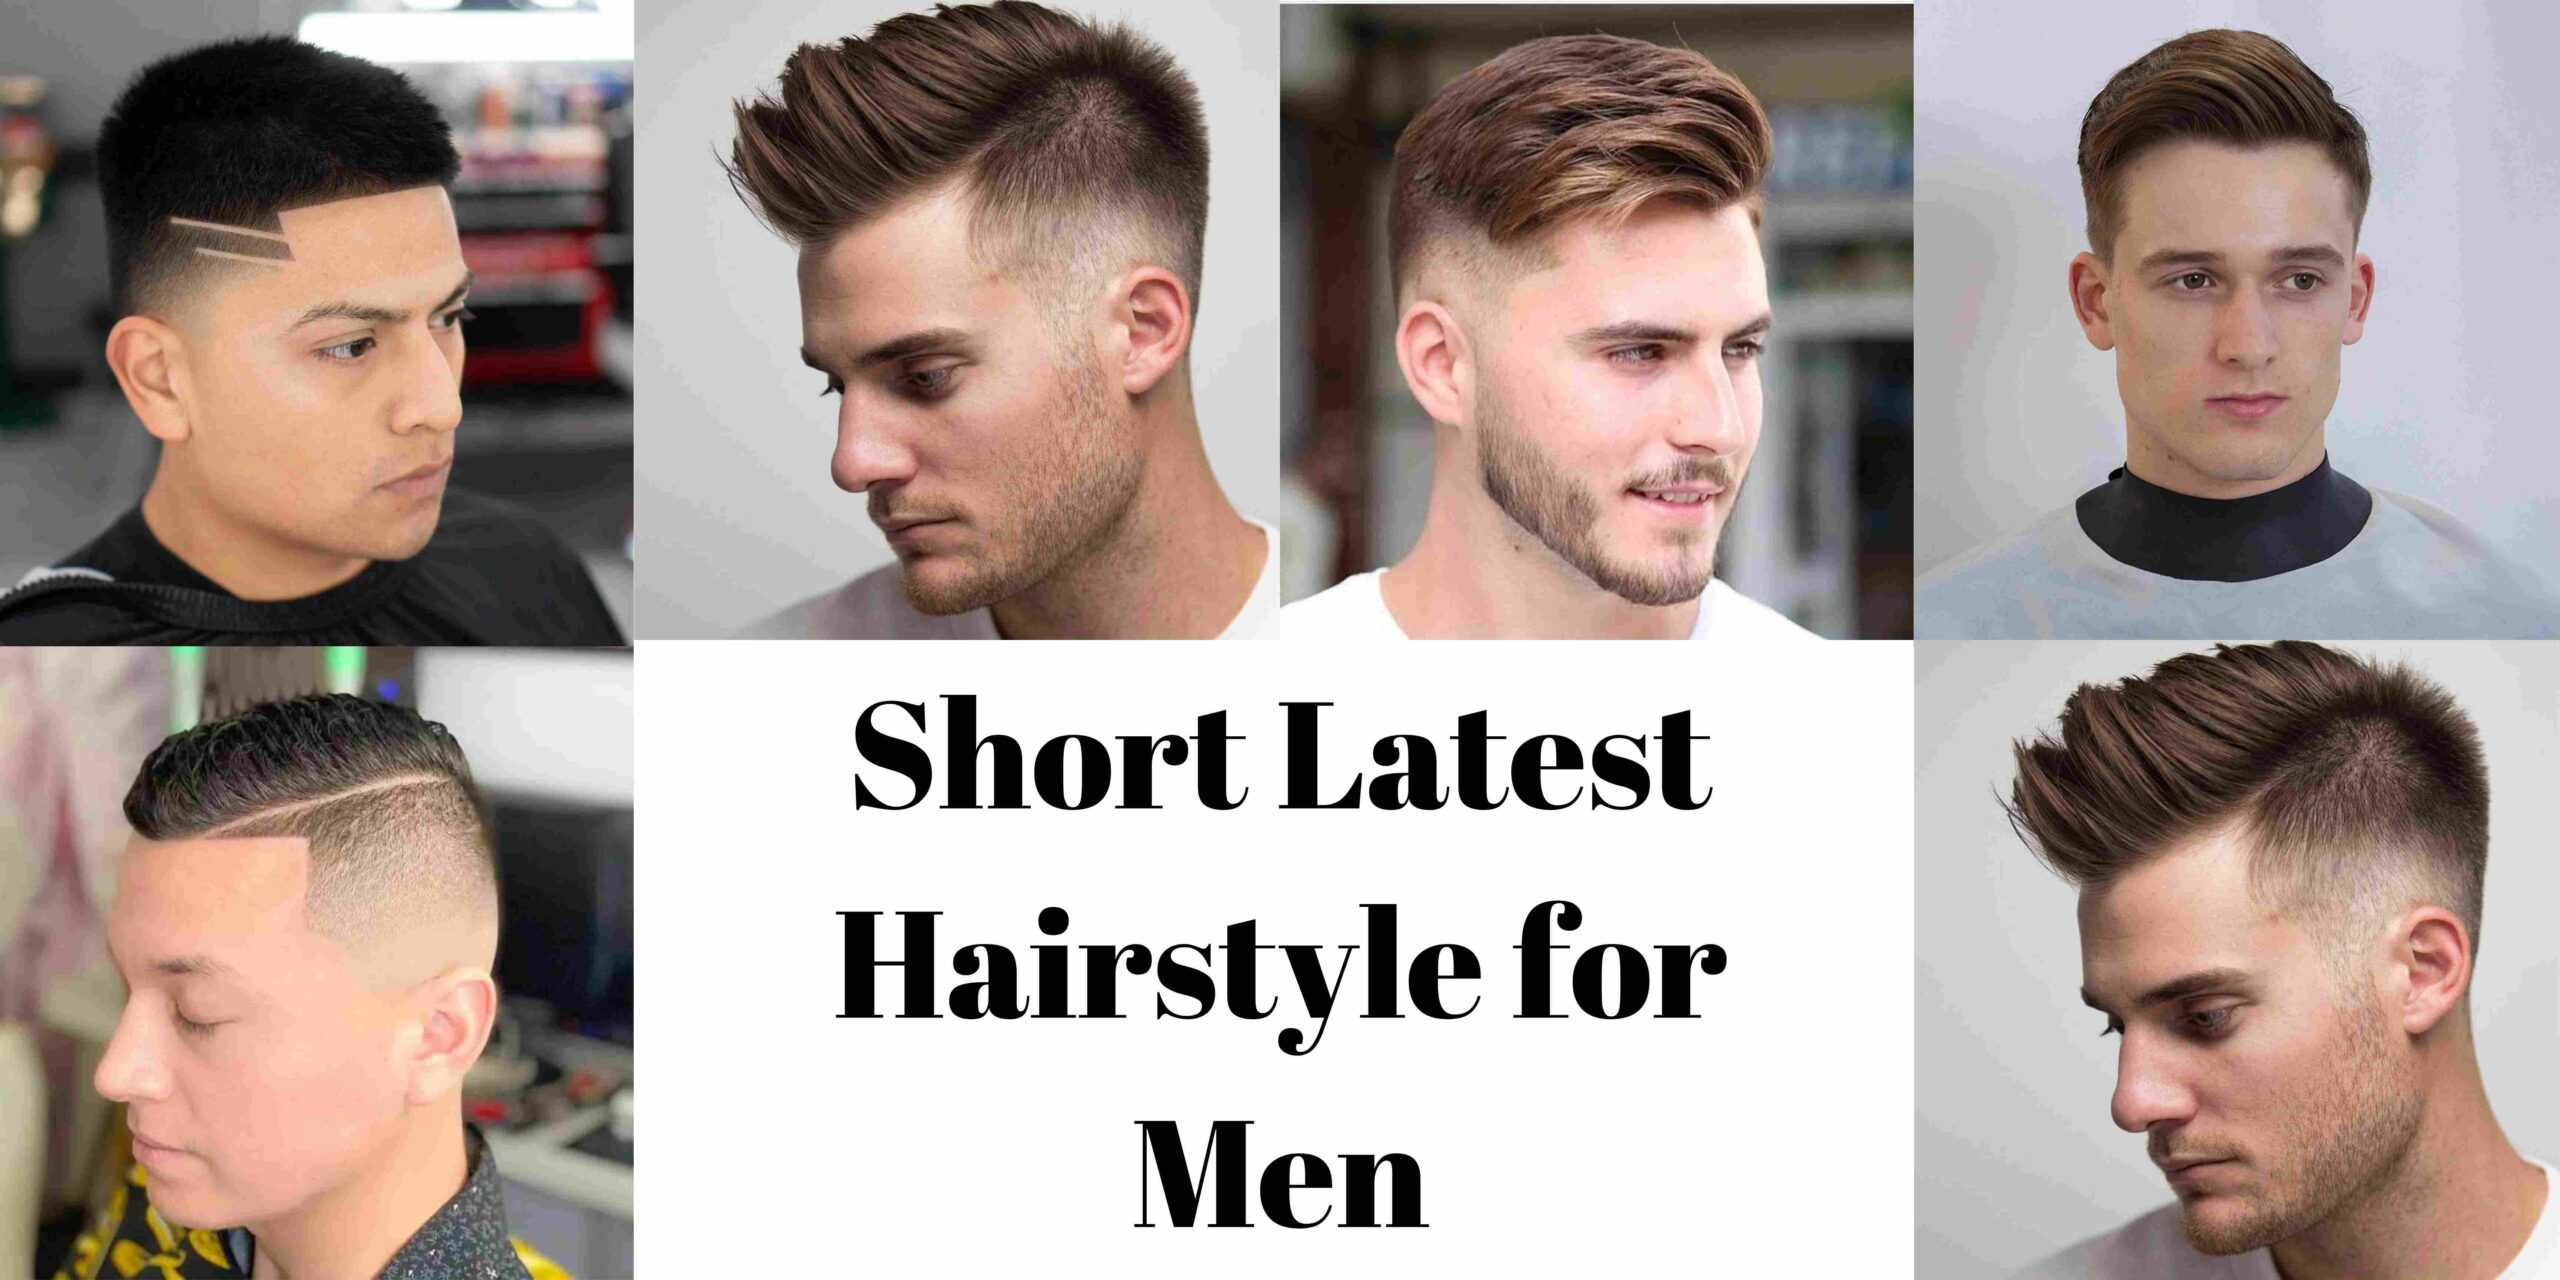 The Best Haircuts and Hairstyles for Men  Man of Many